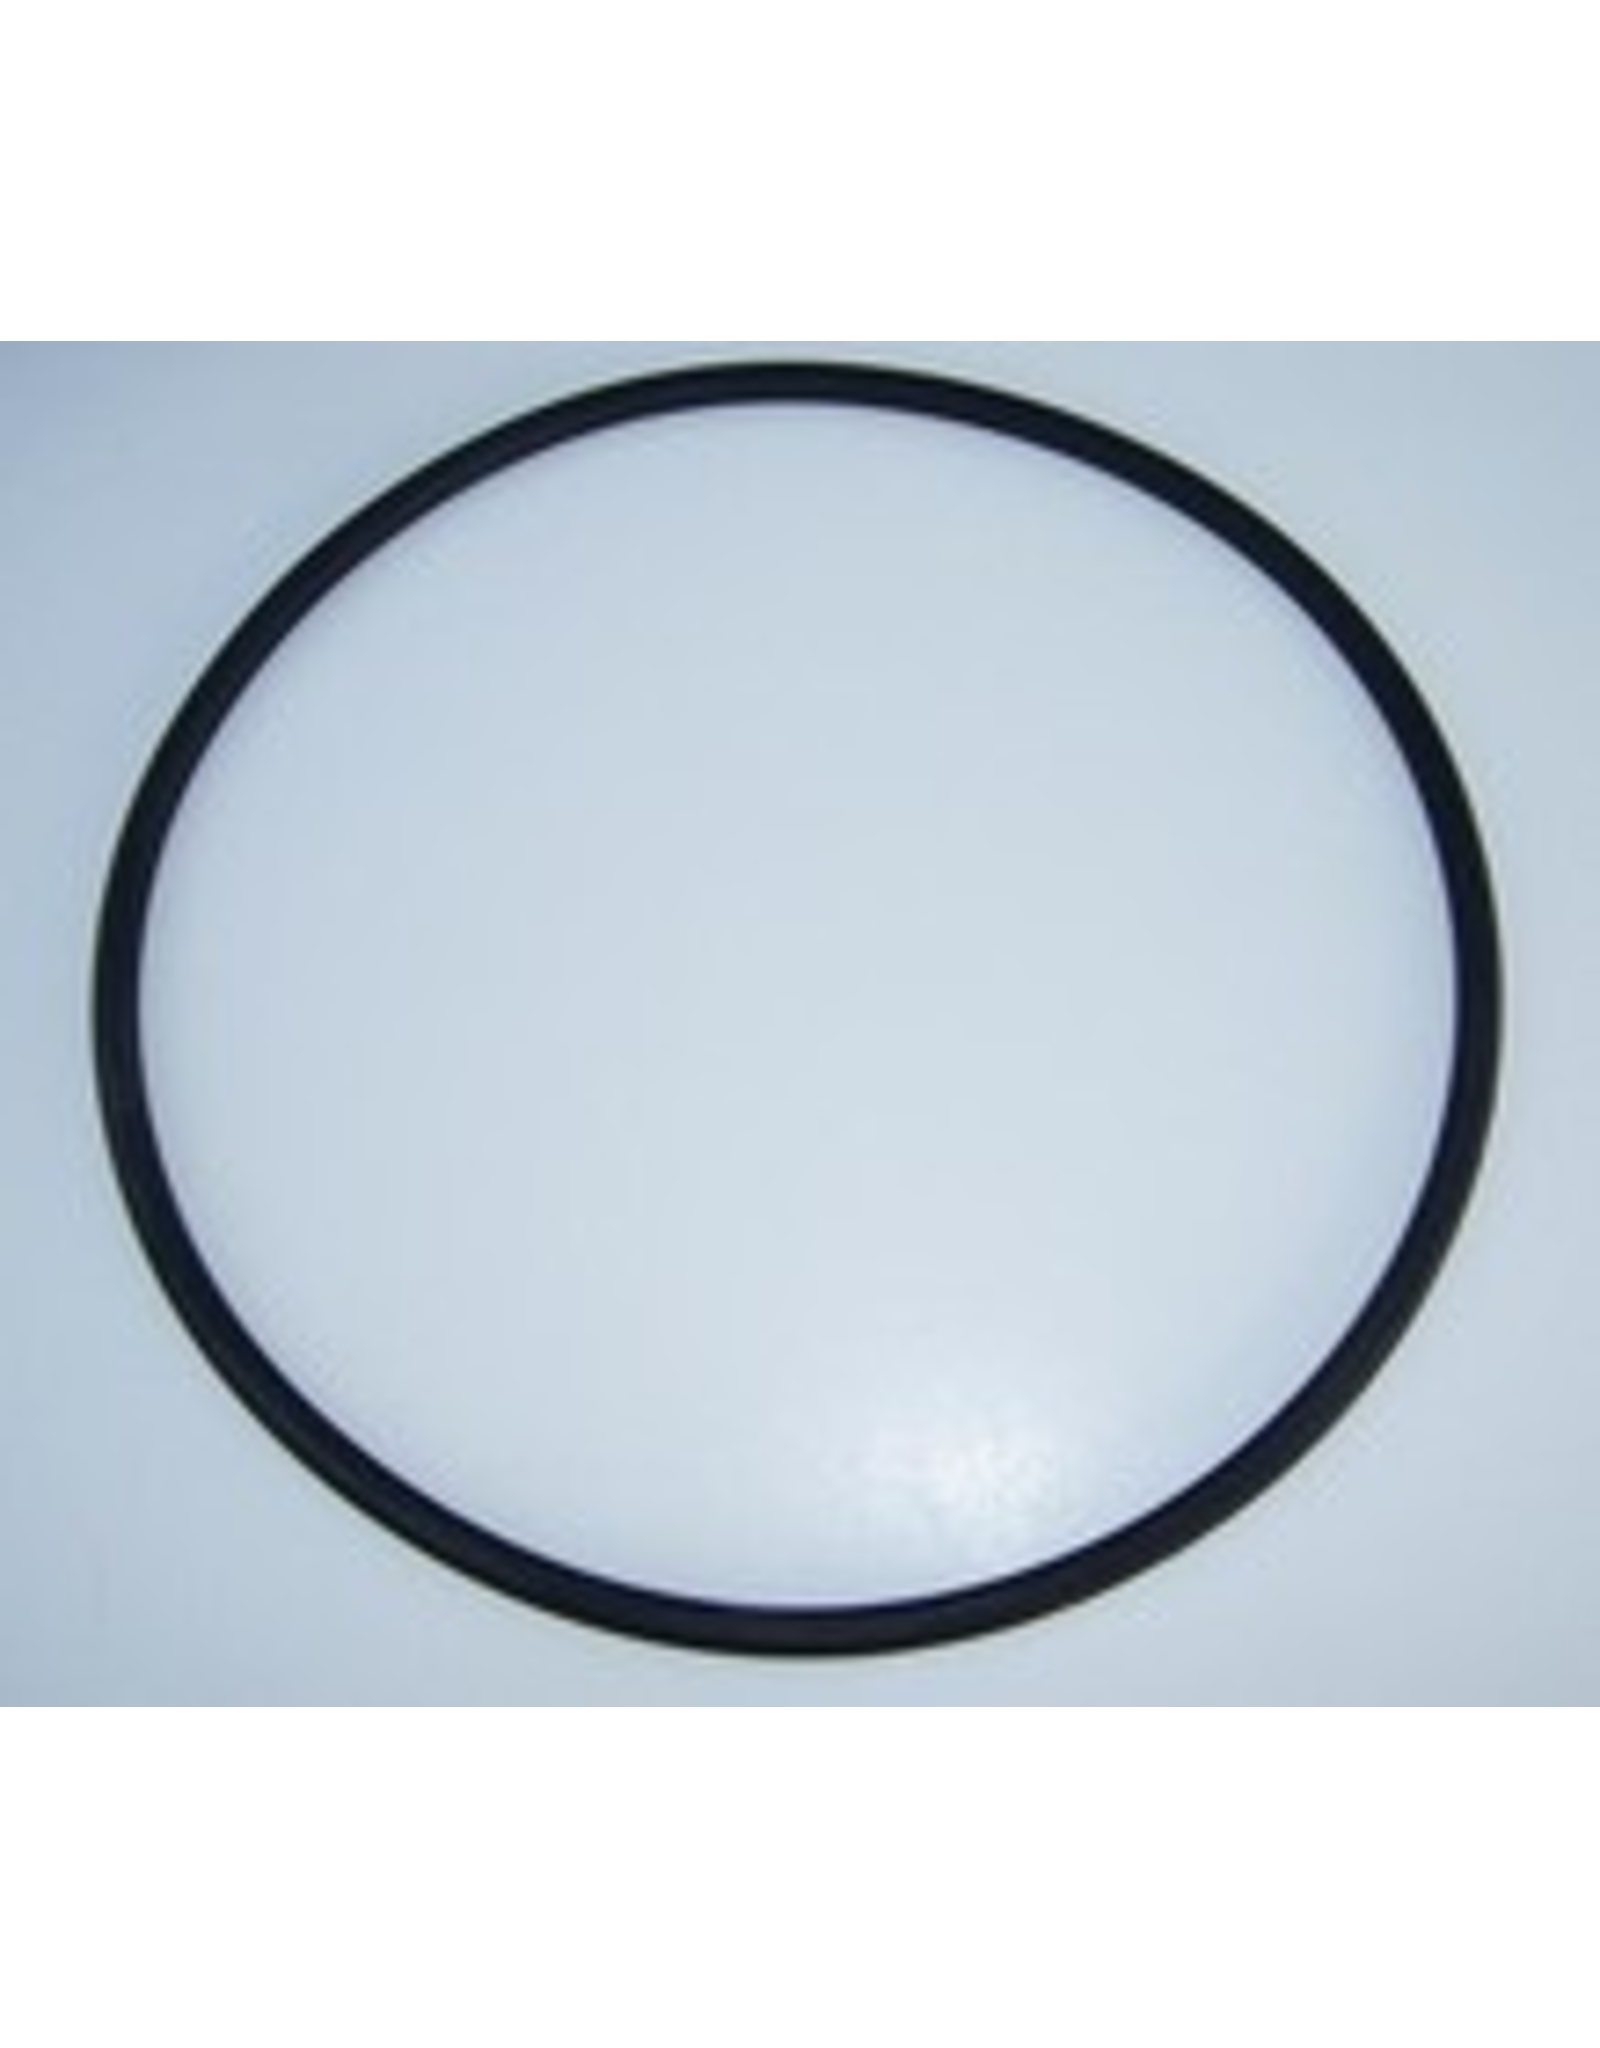 Hobie Hobie O-ring 8" for Replacement on Hobie Twist and Seal Hatches - X-10